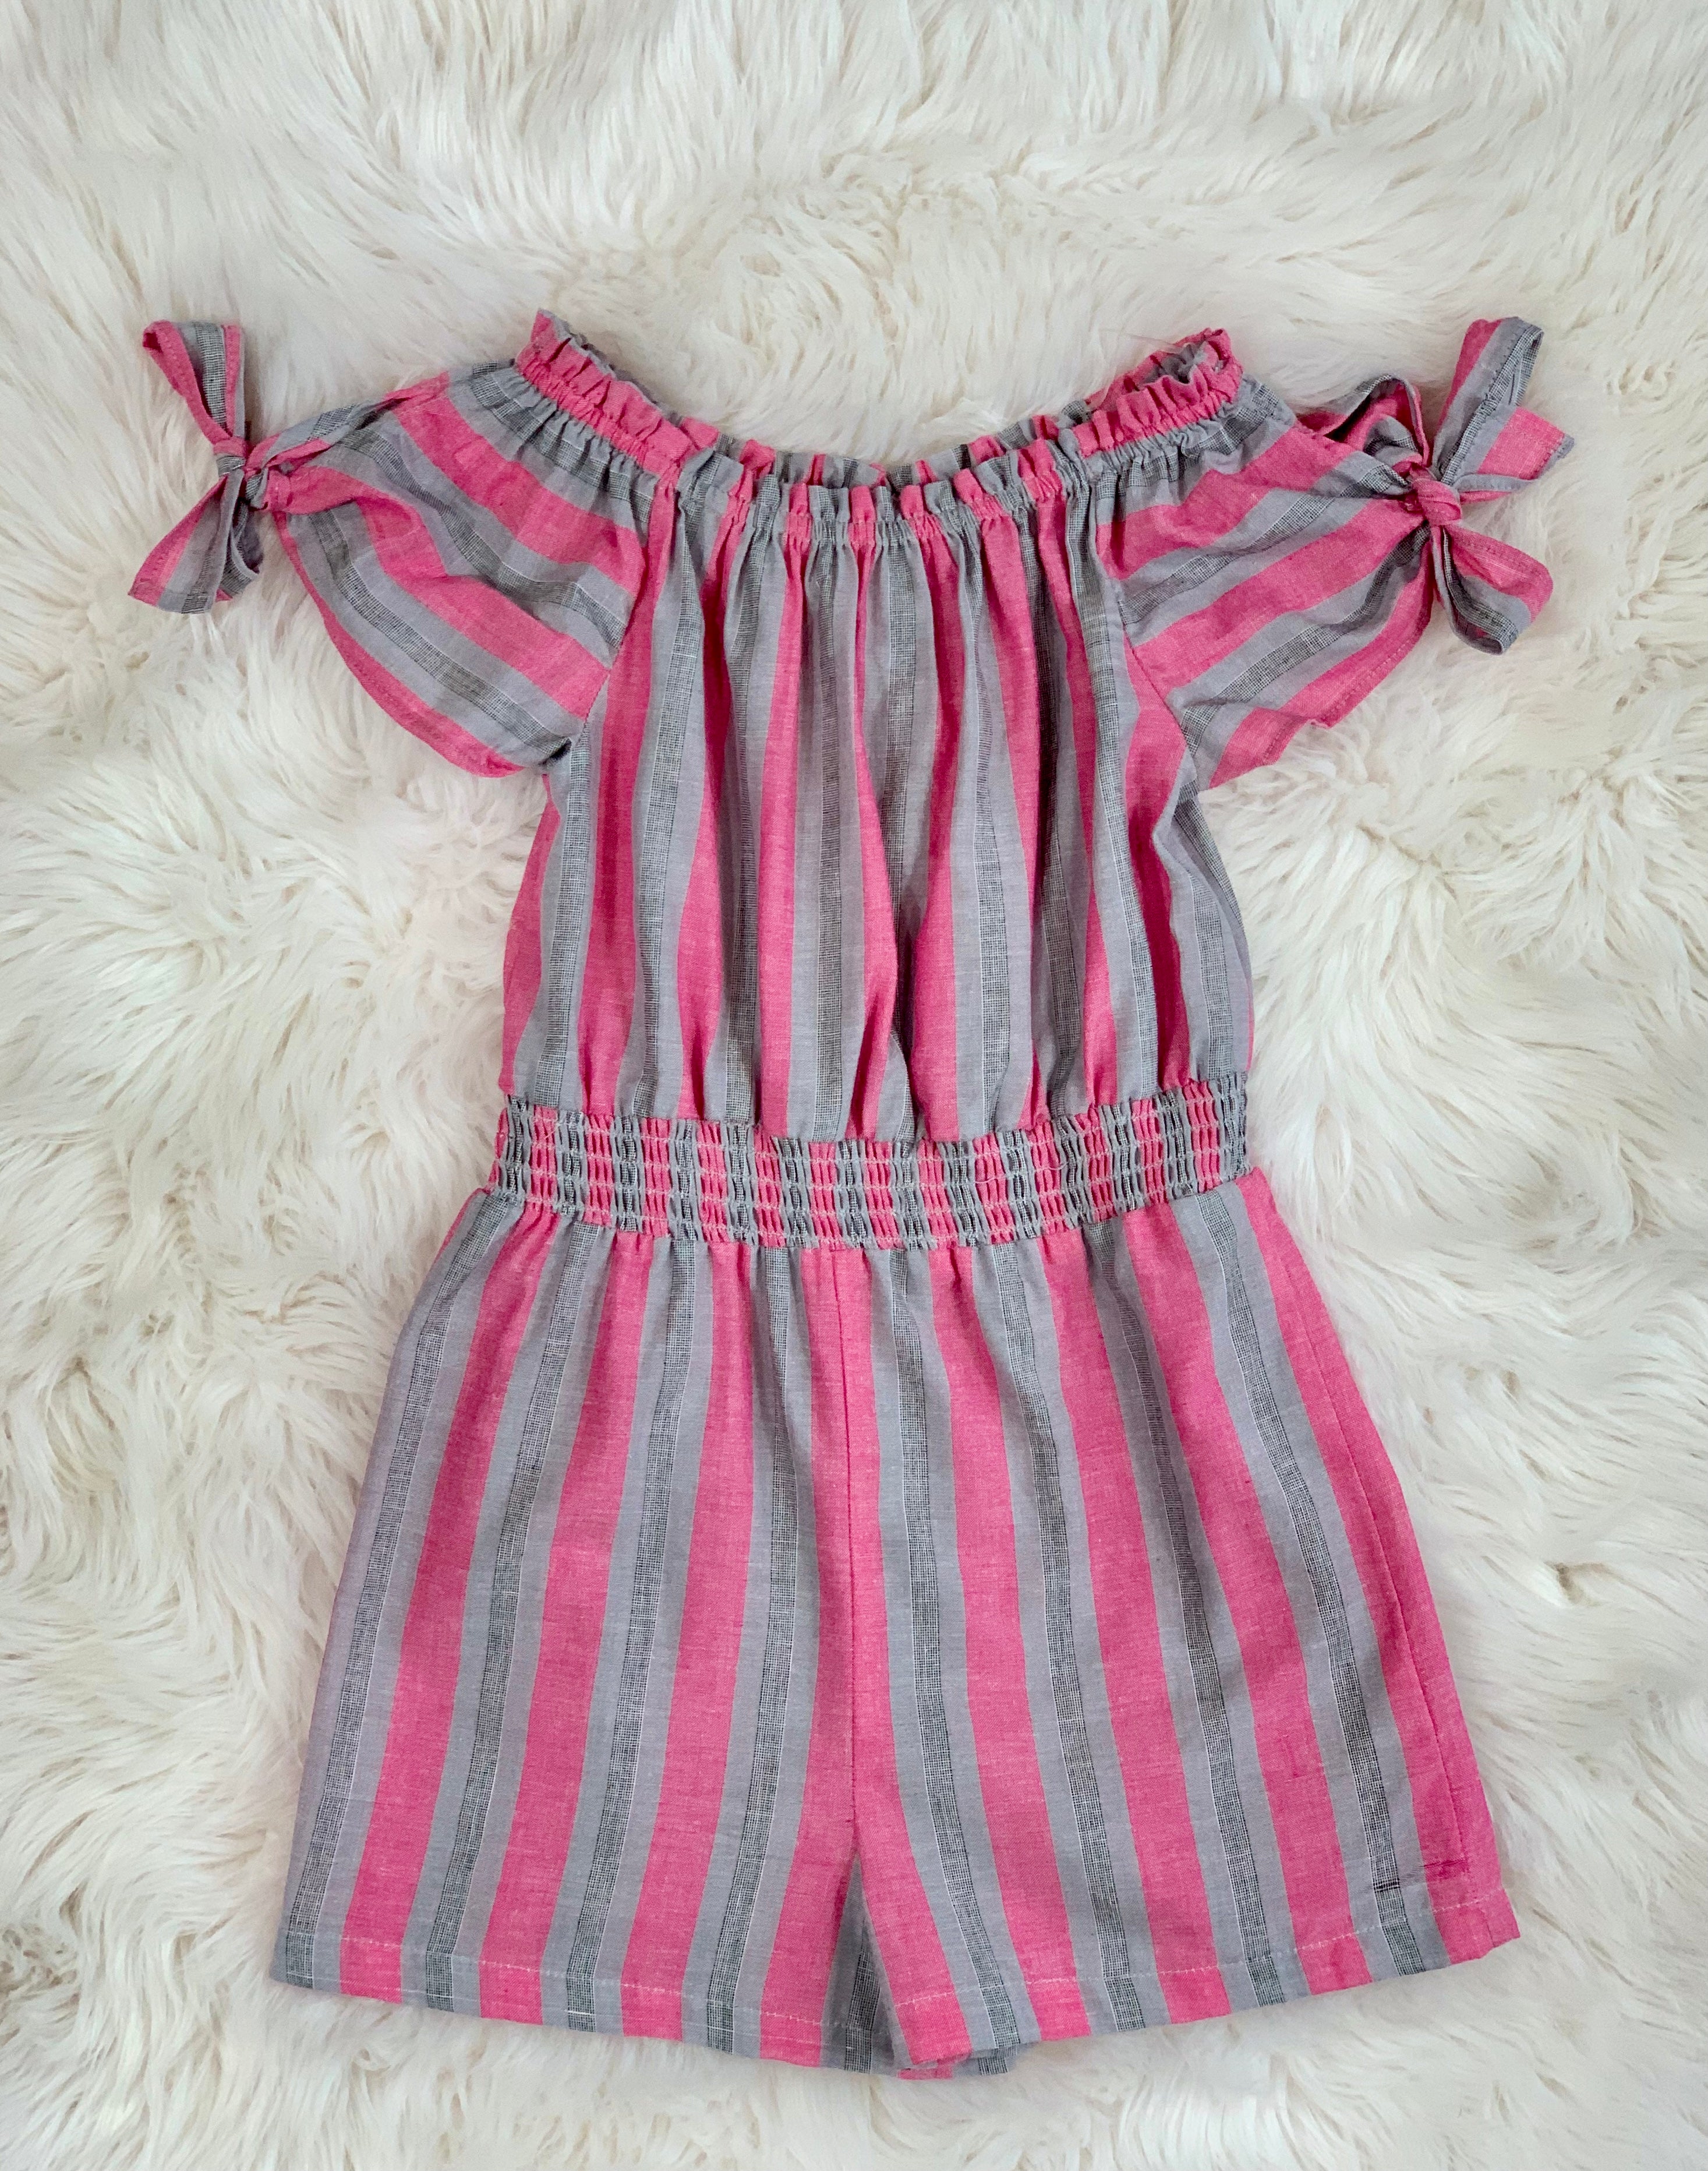 Girls grey and pink striped romper